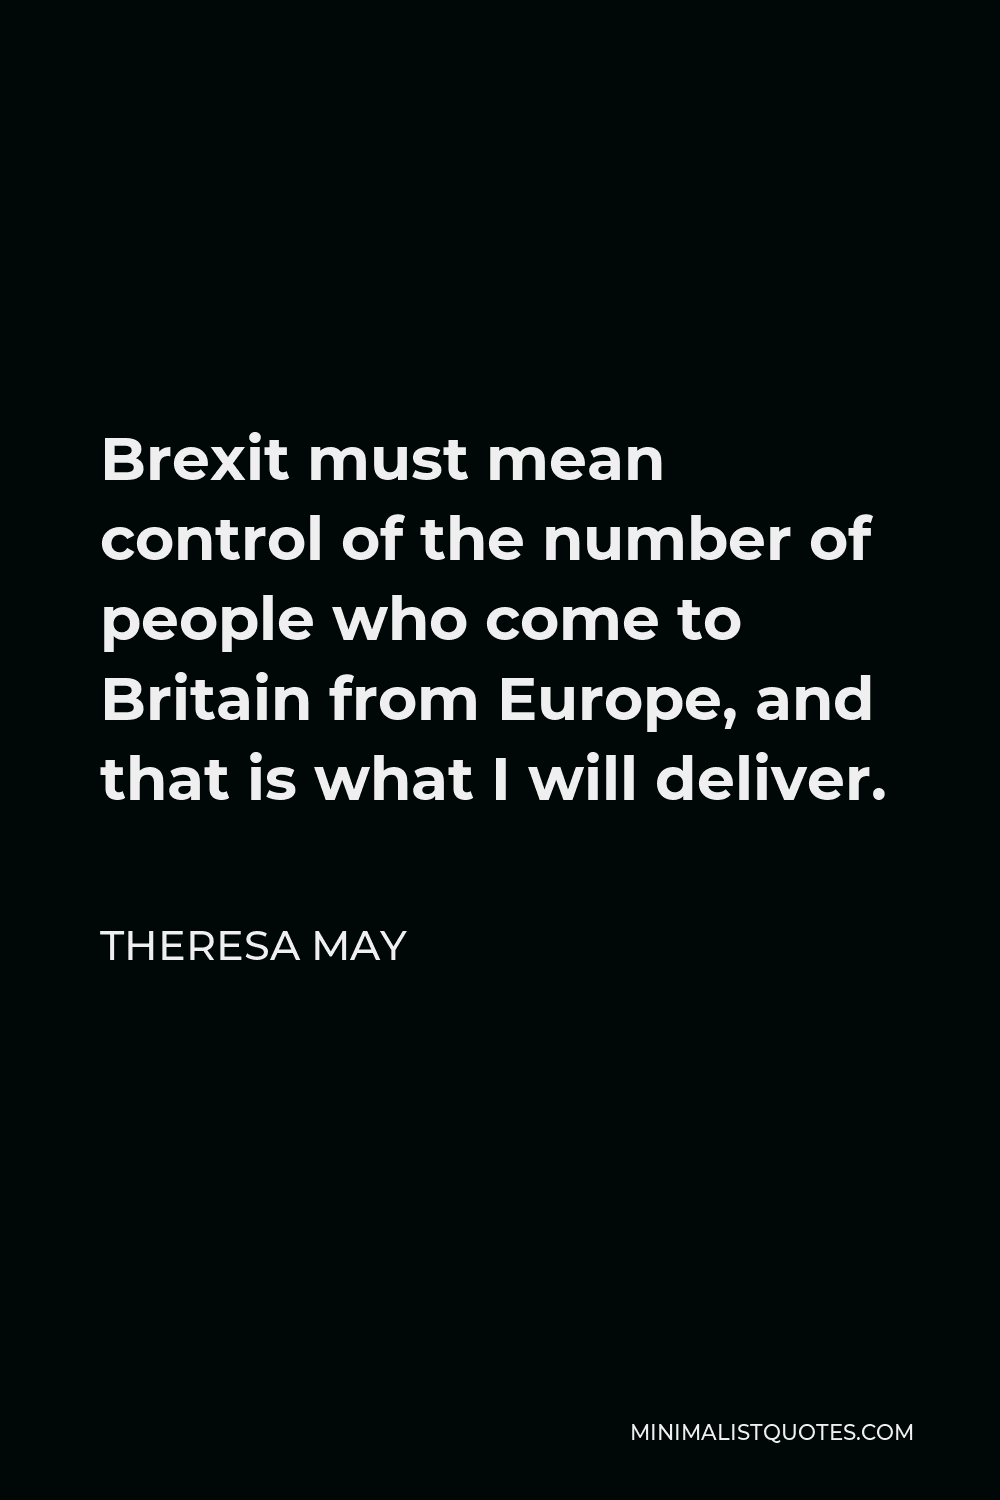 Theresa May Quote - Brexit must mean control of the number of people who come to Britain from Europe, and that is what I will deliver.